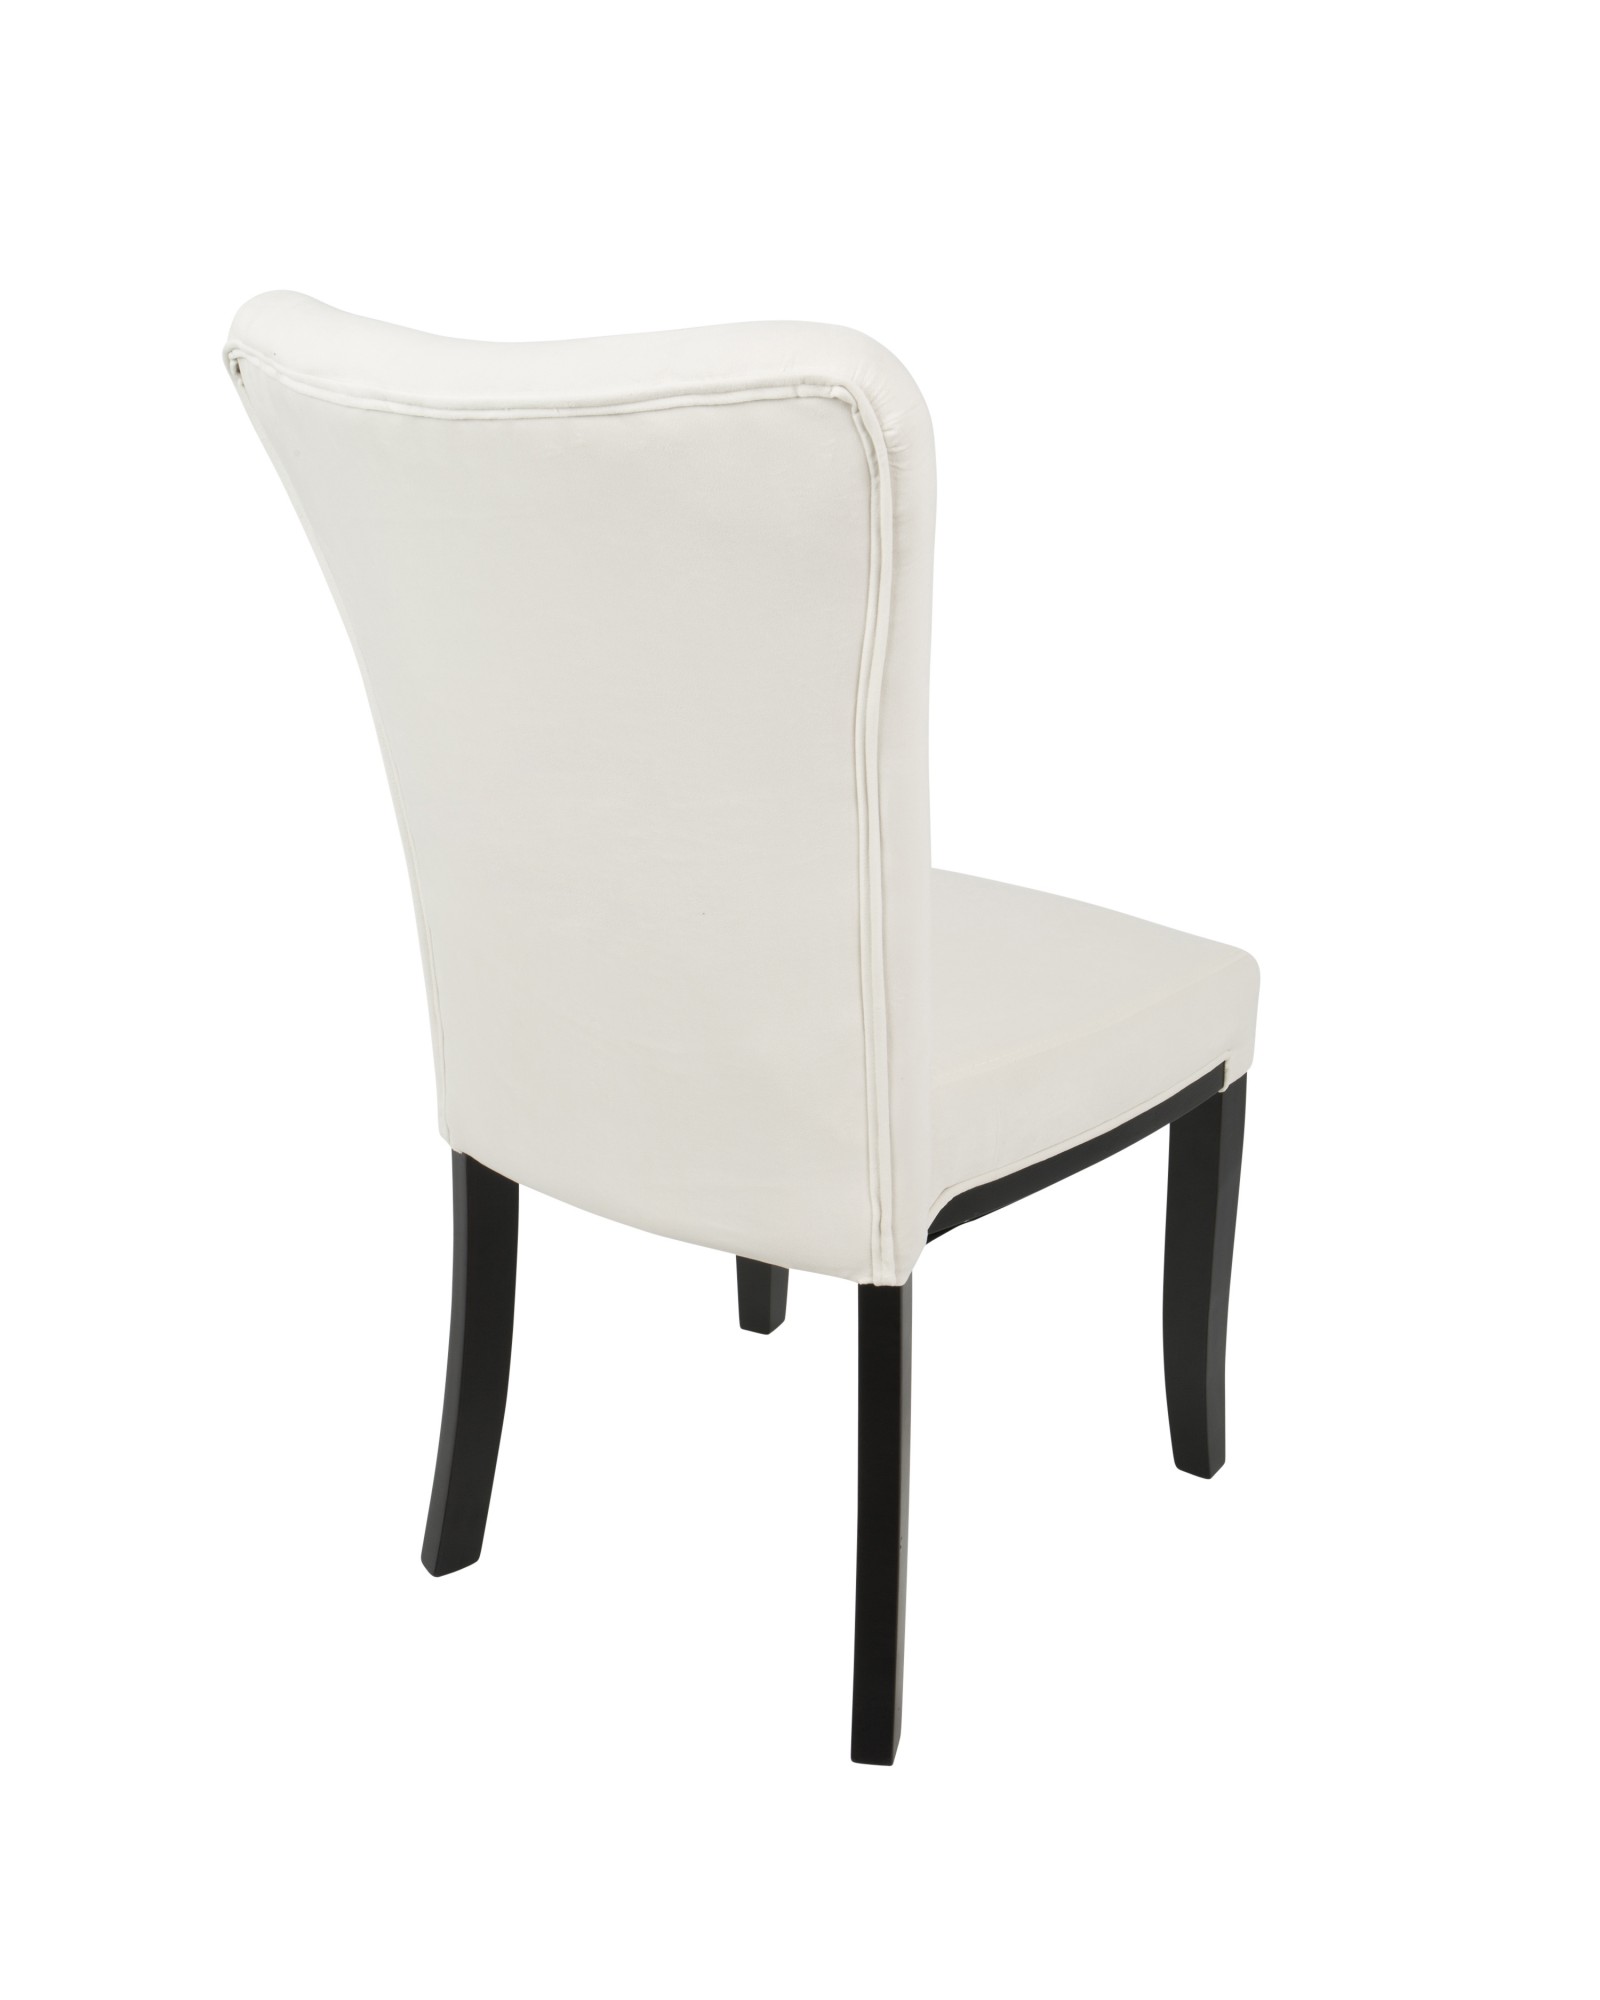 Olivia Contemporary Dining Chair in Espresso Wood and Cream Velvet - Set of 2